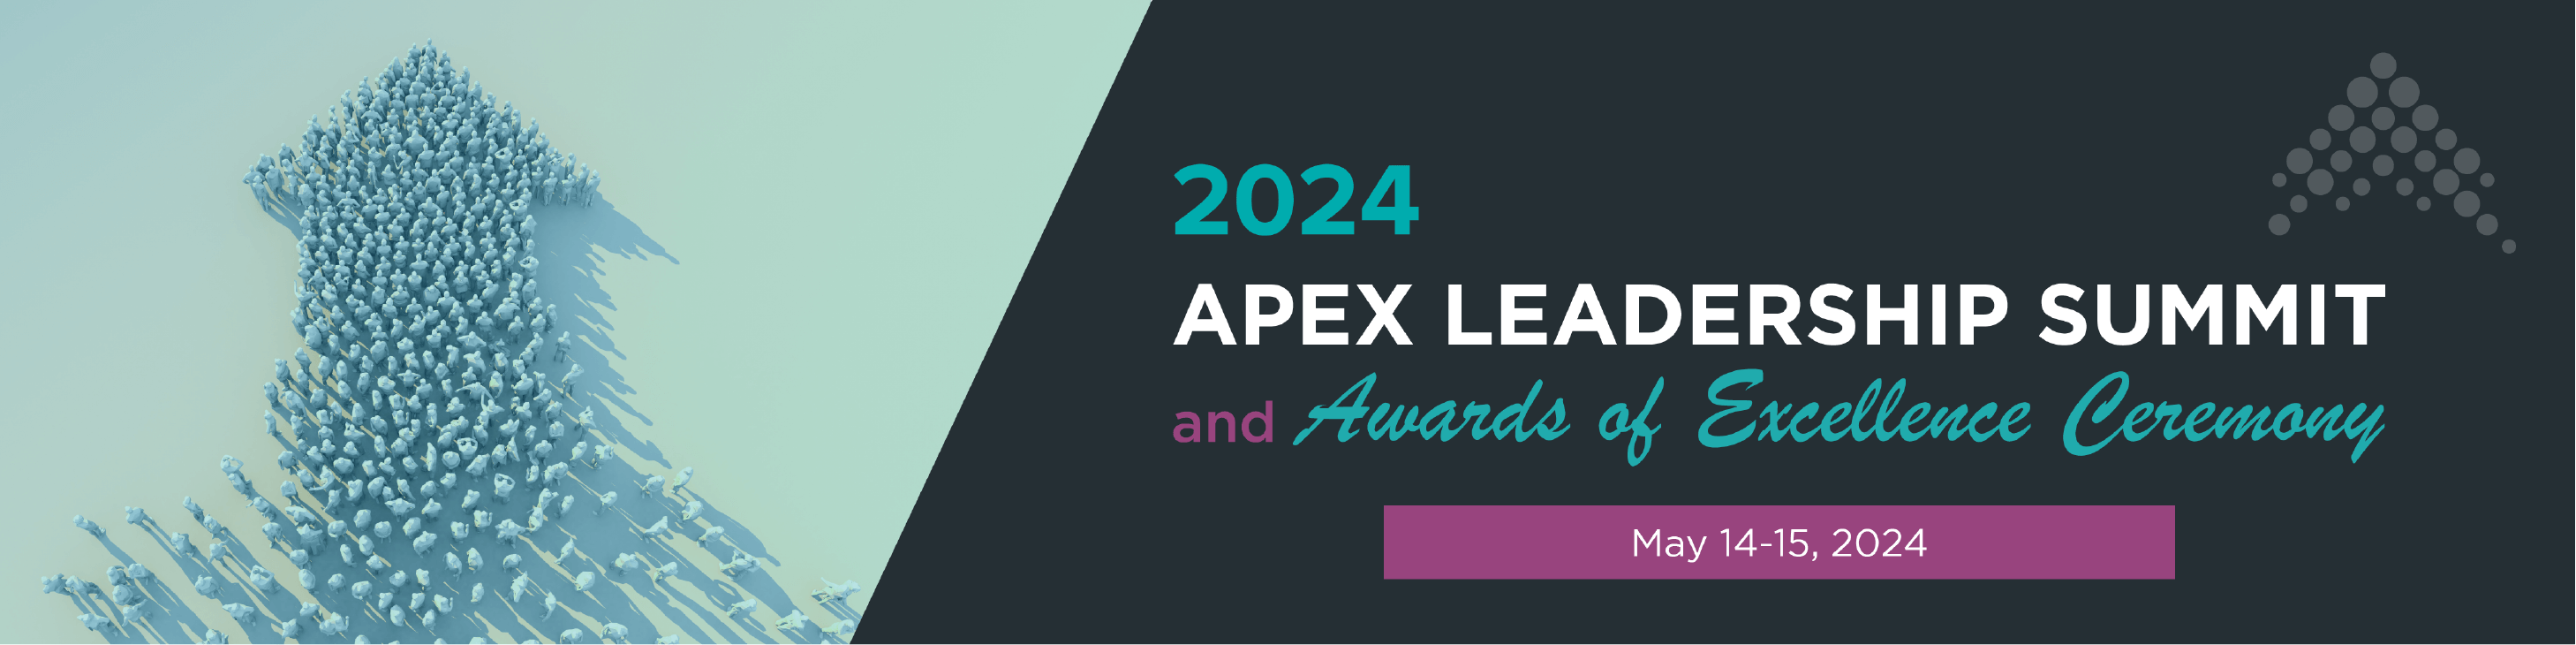 Banner for 2024 APEX Leadership Summit and Awards of Excellence Ceremony - May 14-15, 2024